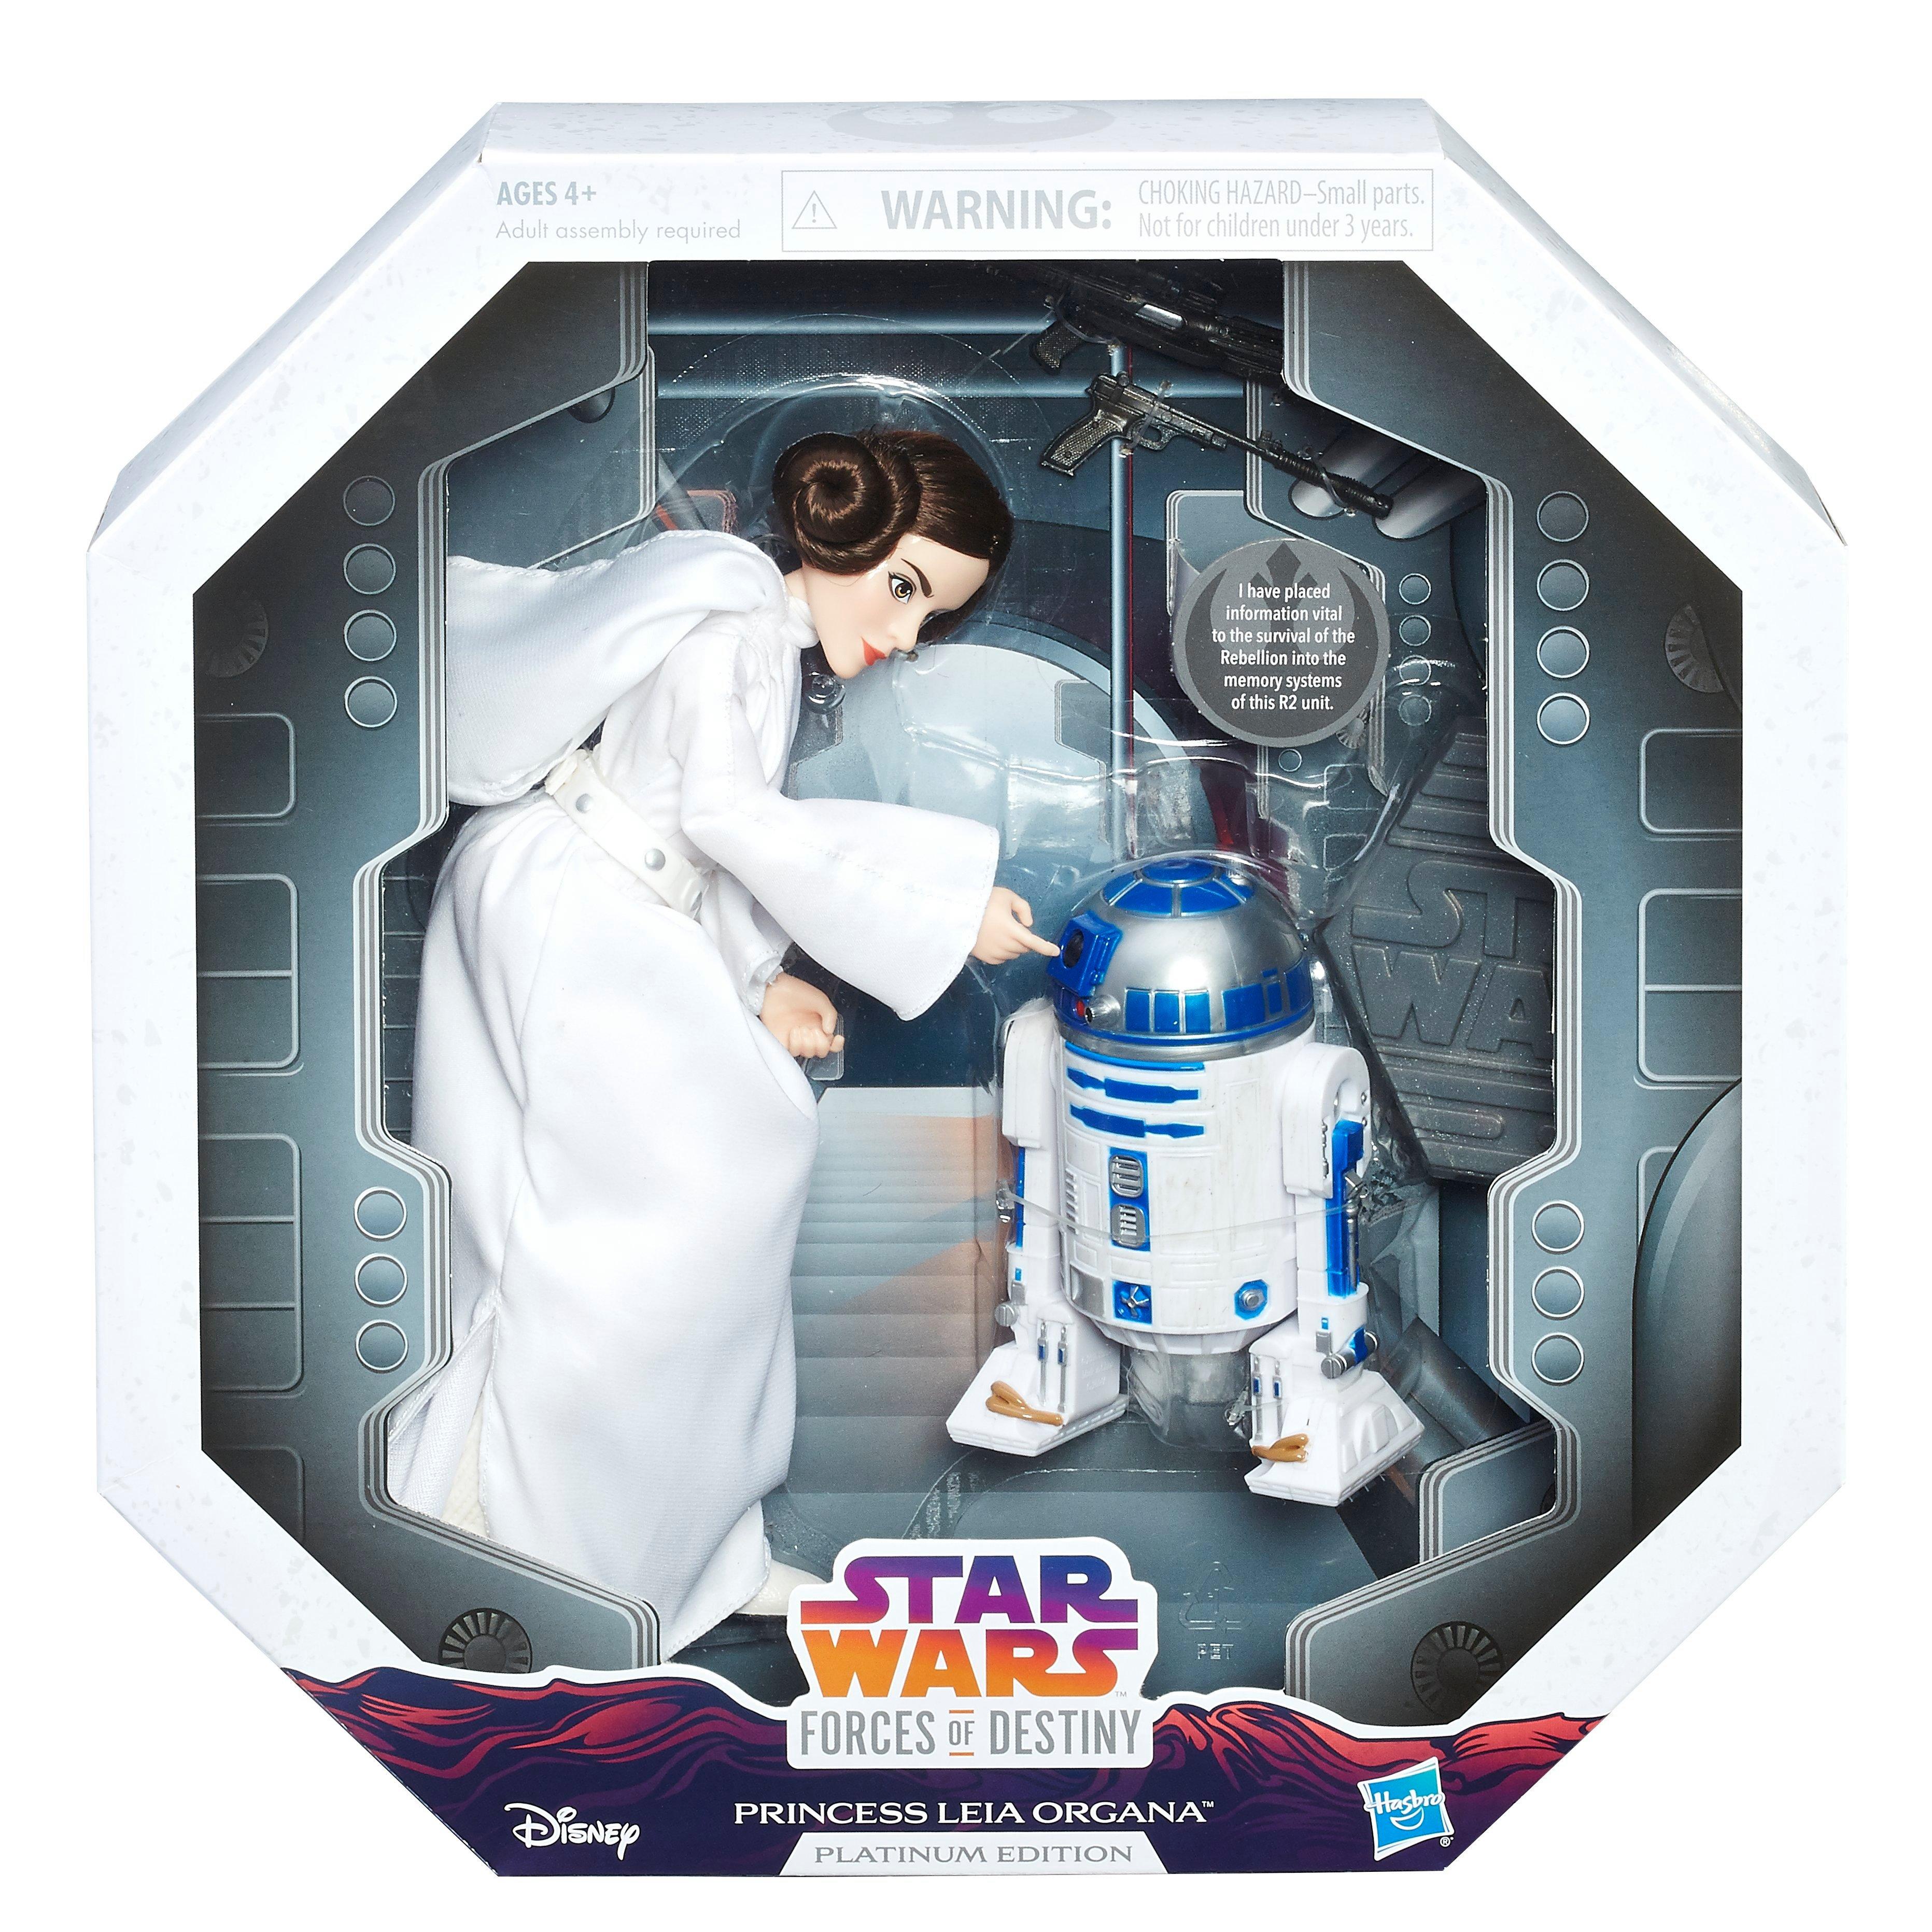 Hasbro Star Wars: Forces of Destiny Princess Leia Organa Platinum Edition 11-in Action Figure